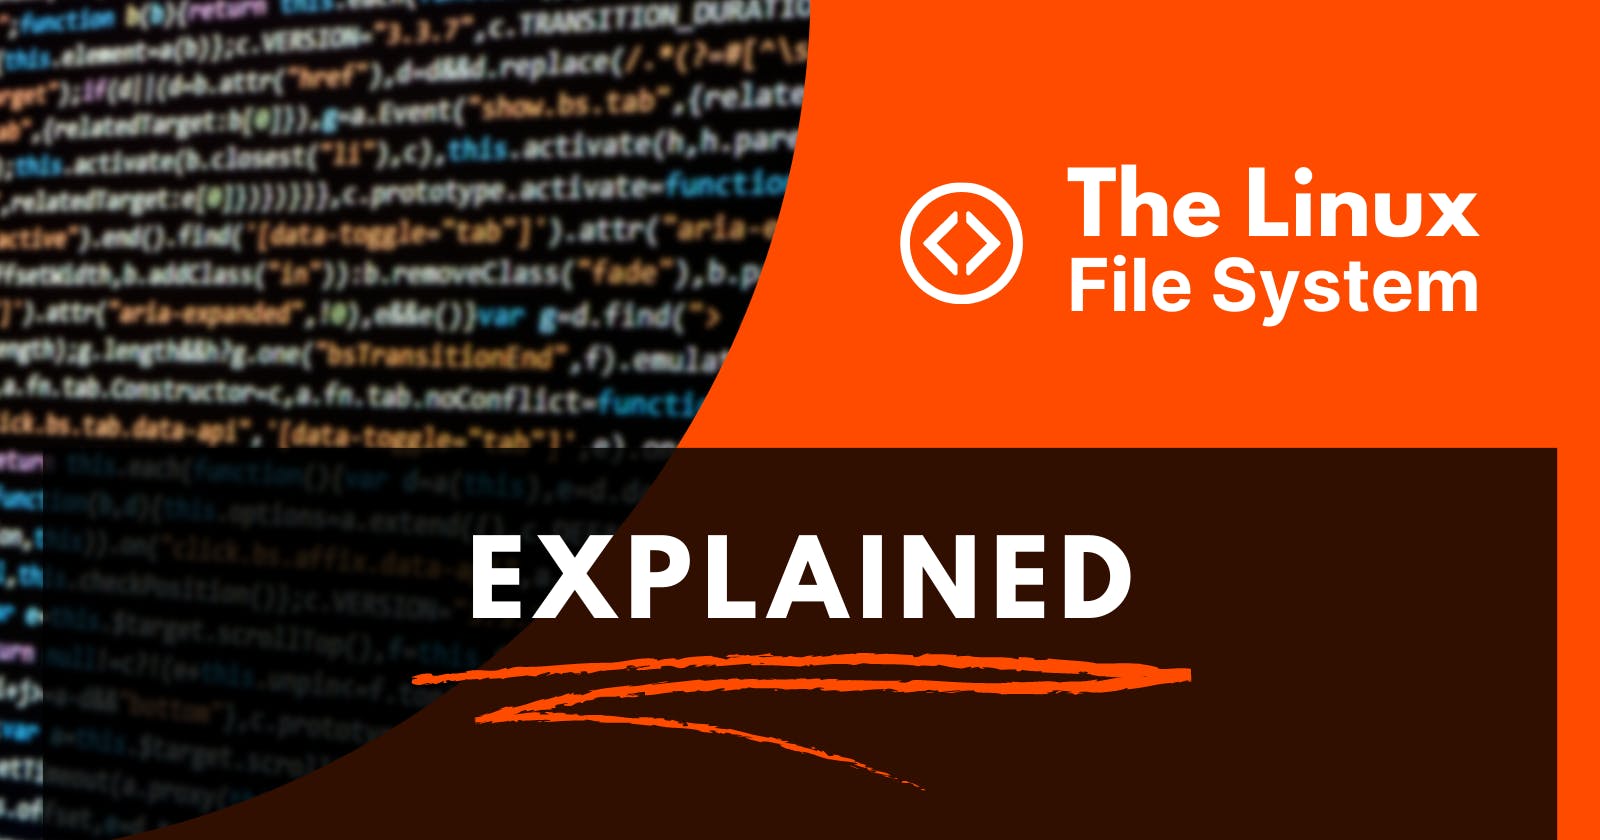 Linux File System: EXPLAINED